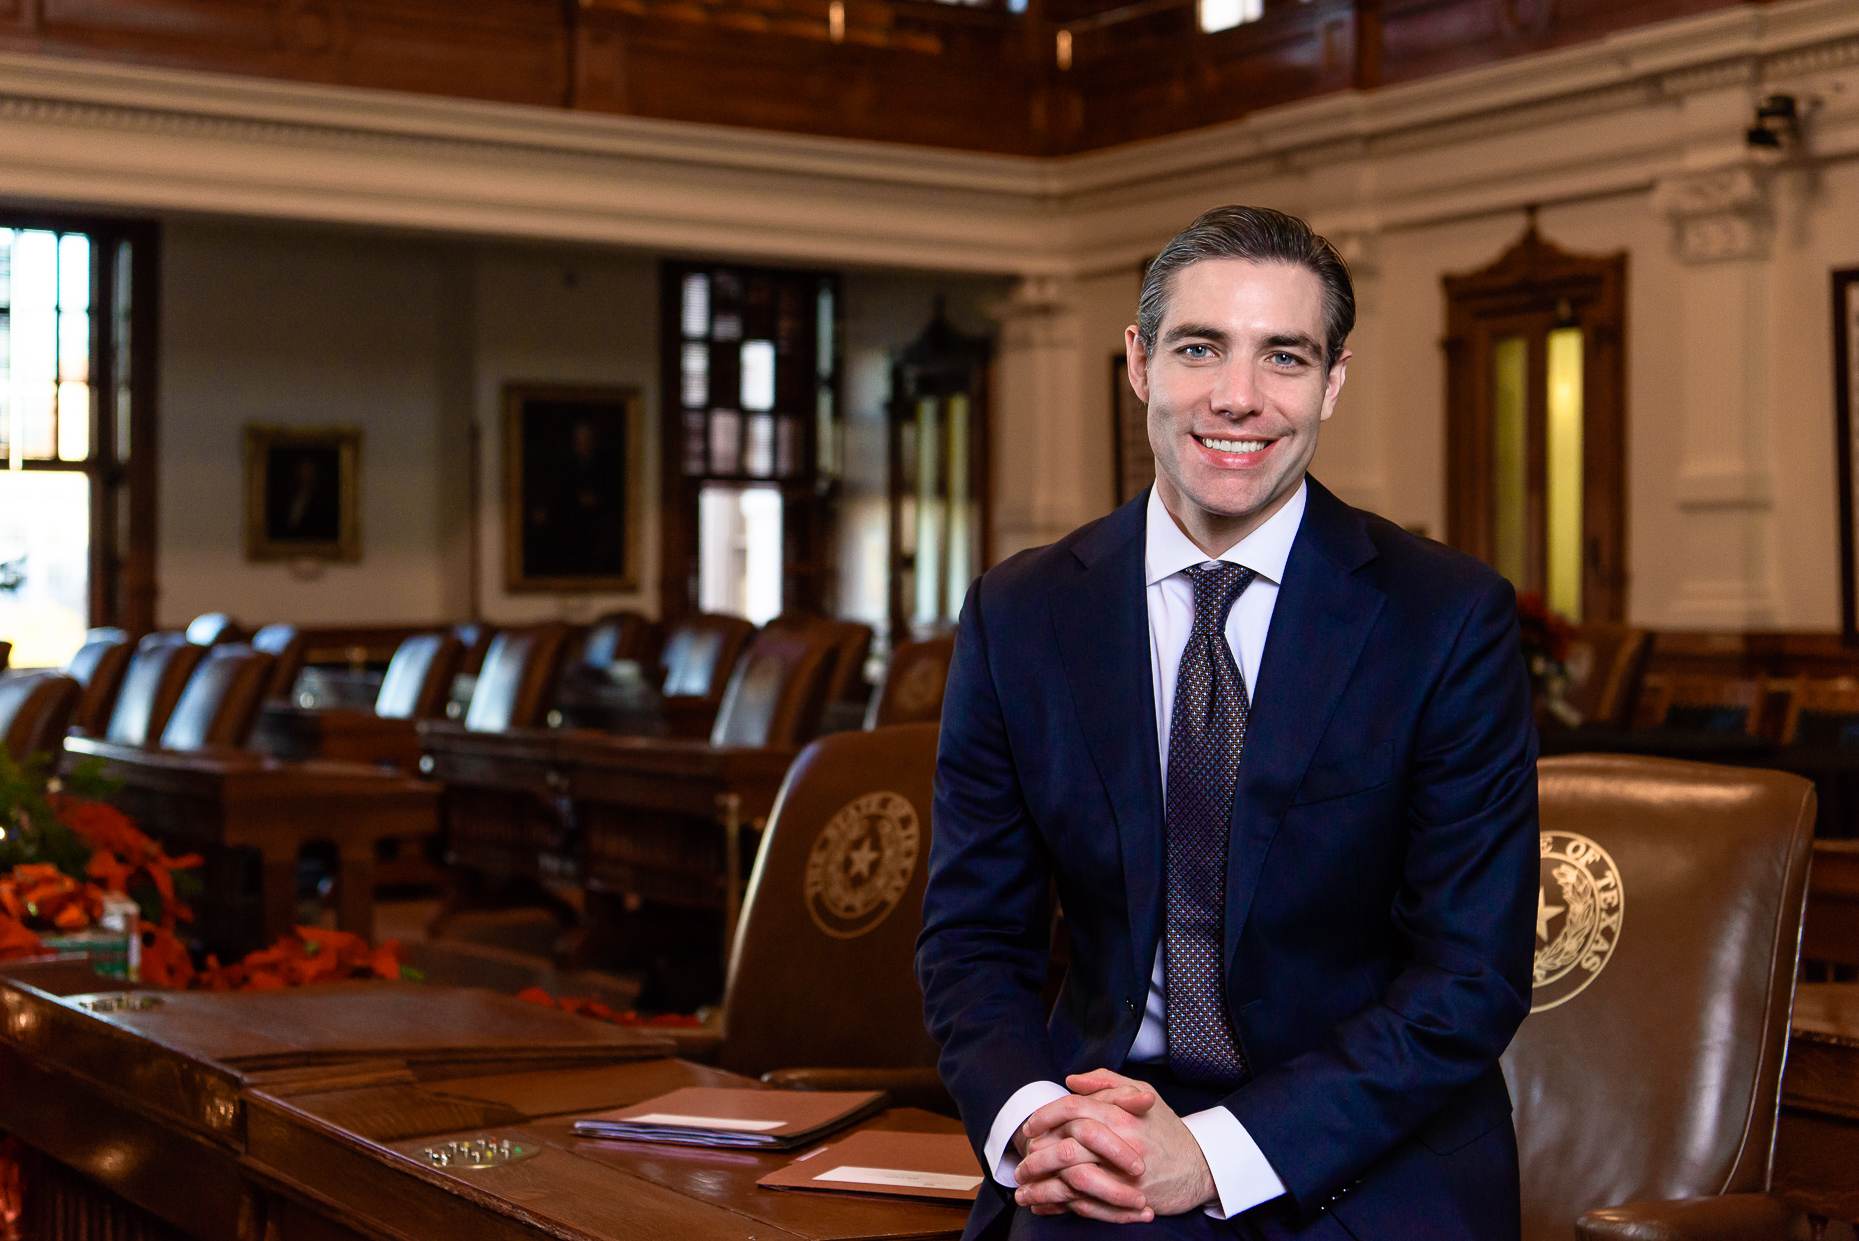  Morgan Meyer portrait at the capitol in austin, texas